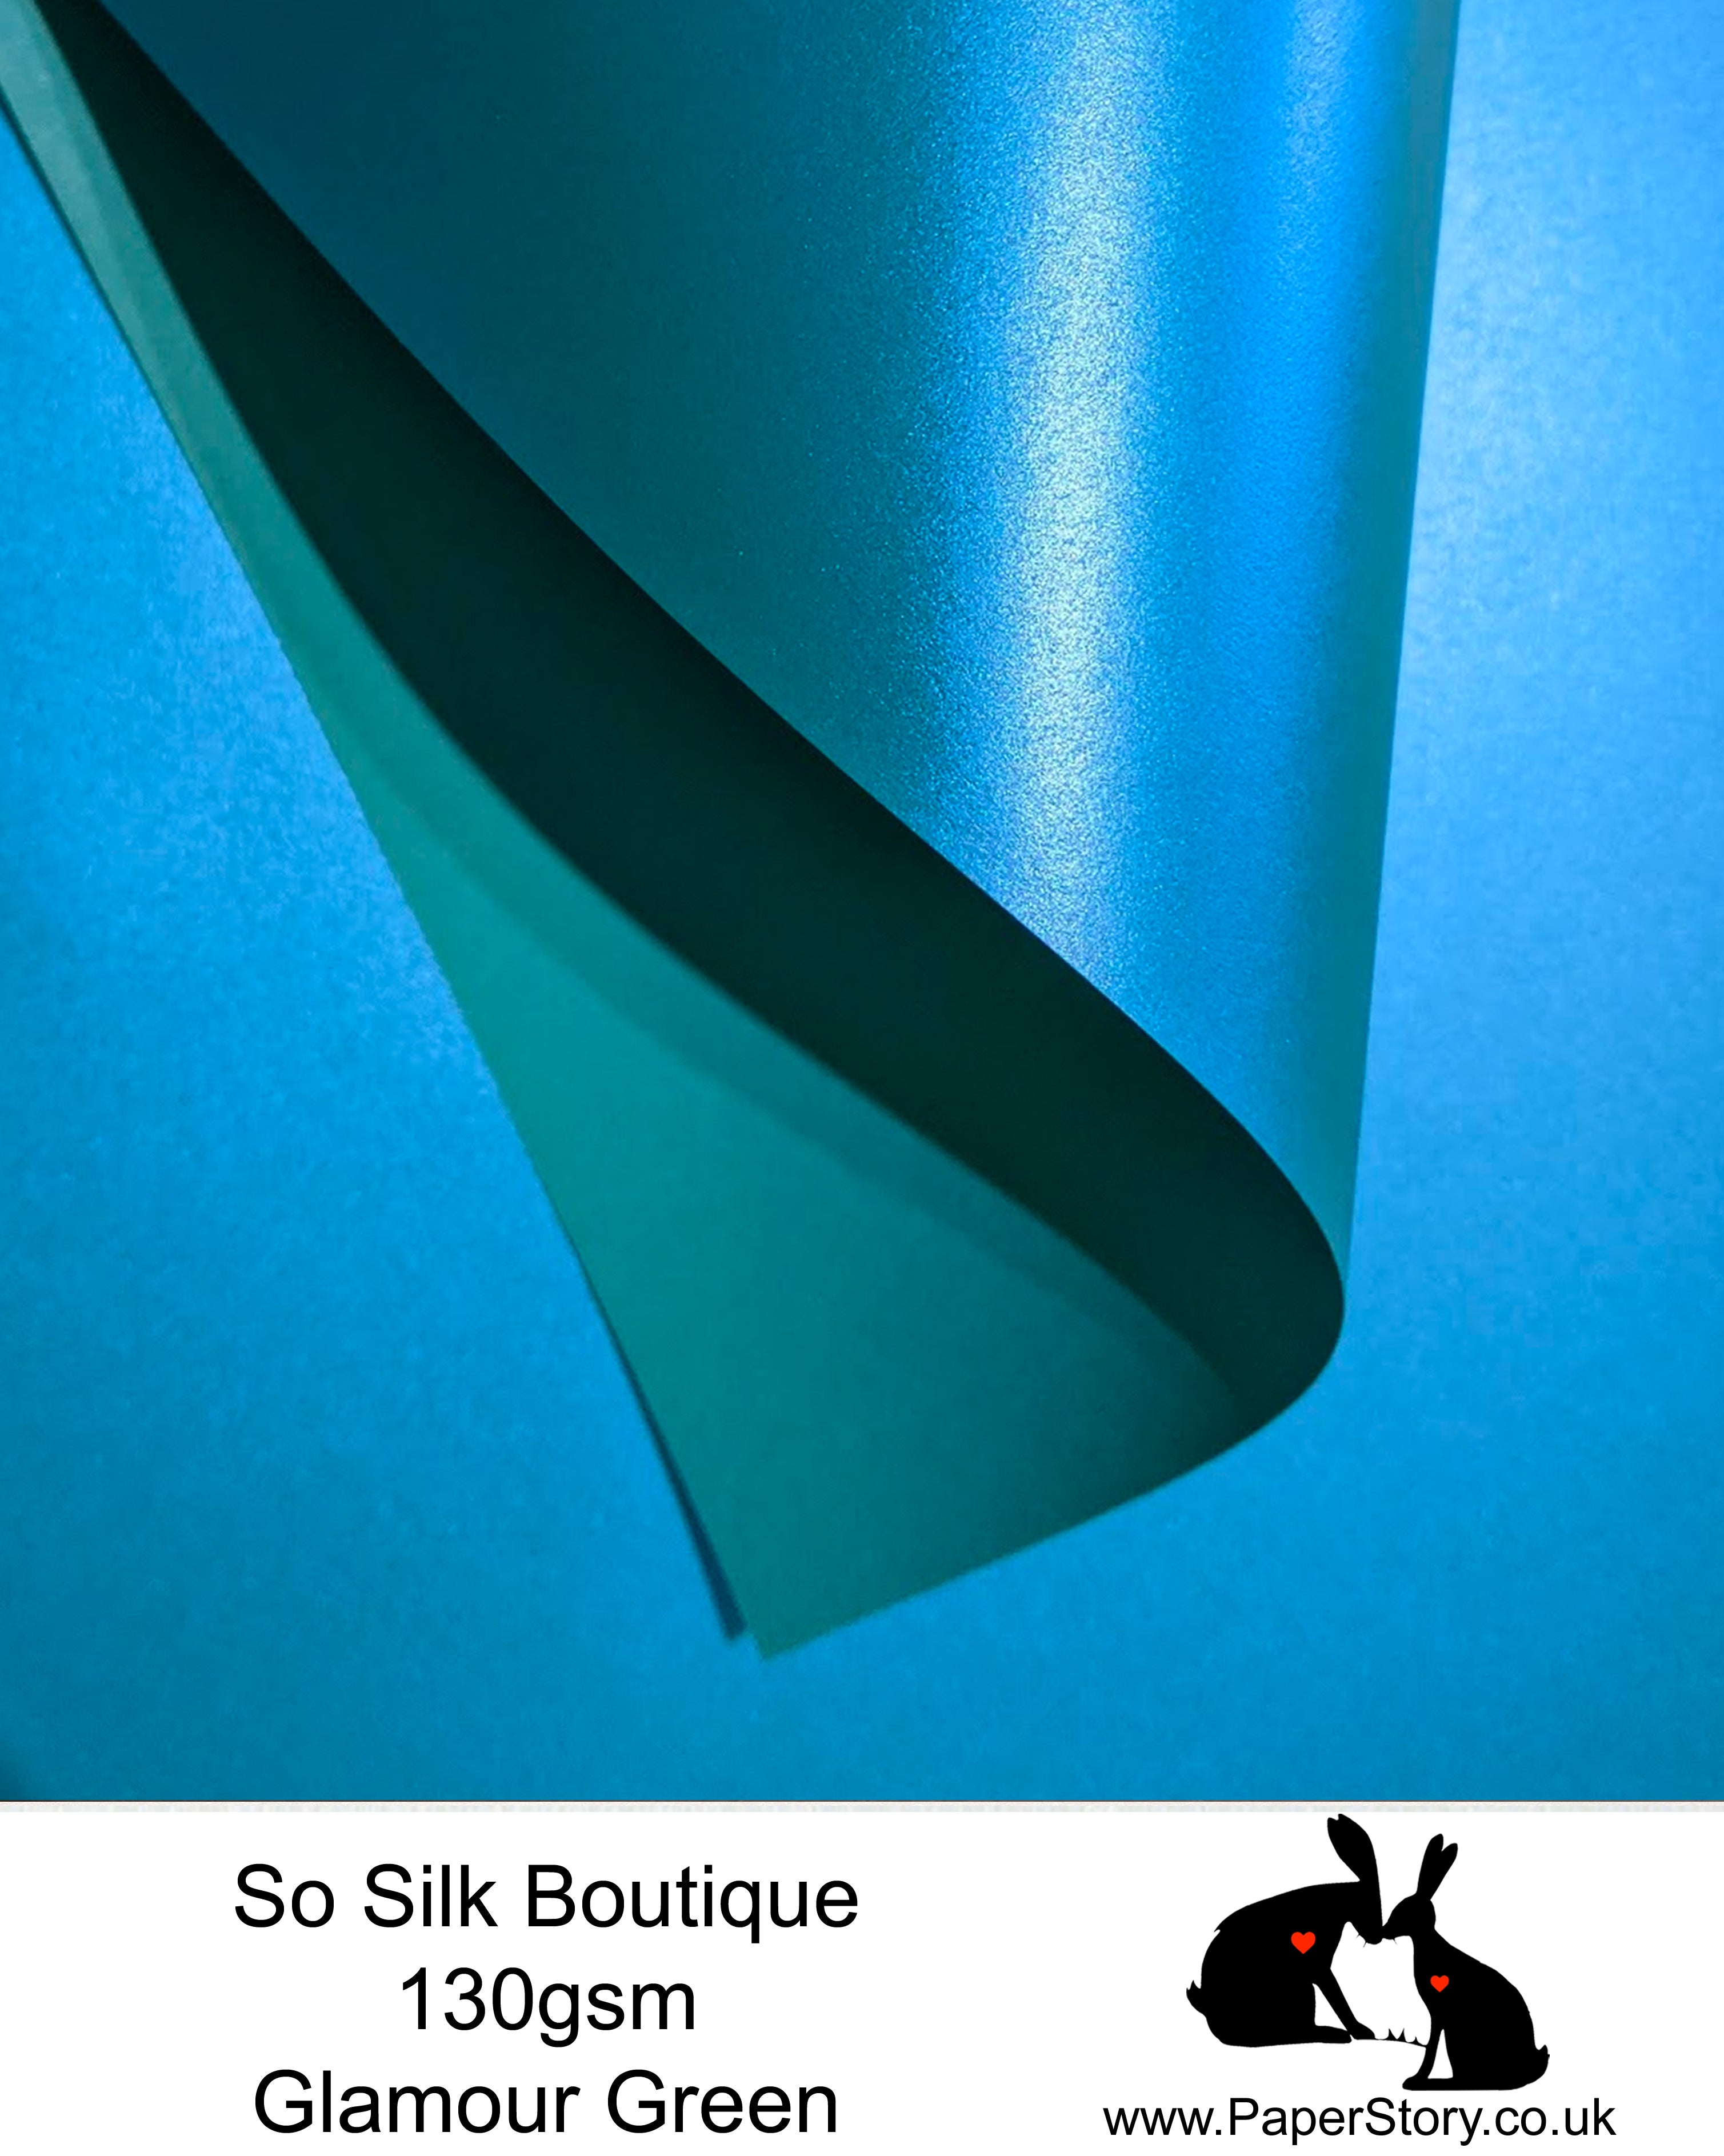 So Silk Boutique 130 gsm. Silky soft Papercutting and craft paper. With a Shimmering Pearlescent finish made with silk fibres, this is a perfect papercutting paper for beginners to experts. The paper has a one sided pearlescent coating, the other side is matte finish for printing templates. When printing with an inkjet printer on the matte side, it is advised to use a quick print or draft settings to avoid ripples, and allow to dry thoroughly. FSC approved, PH Neutral, 100% recyclable acid free.